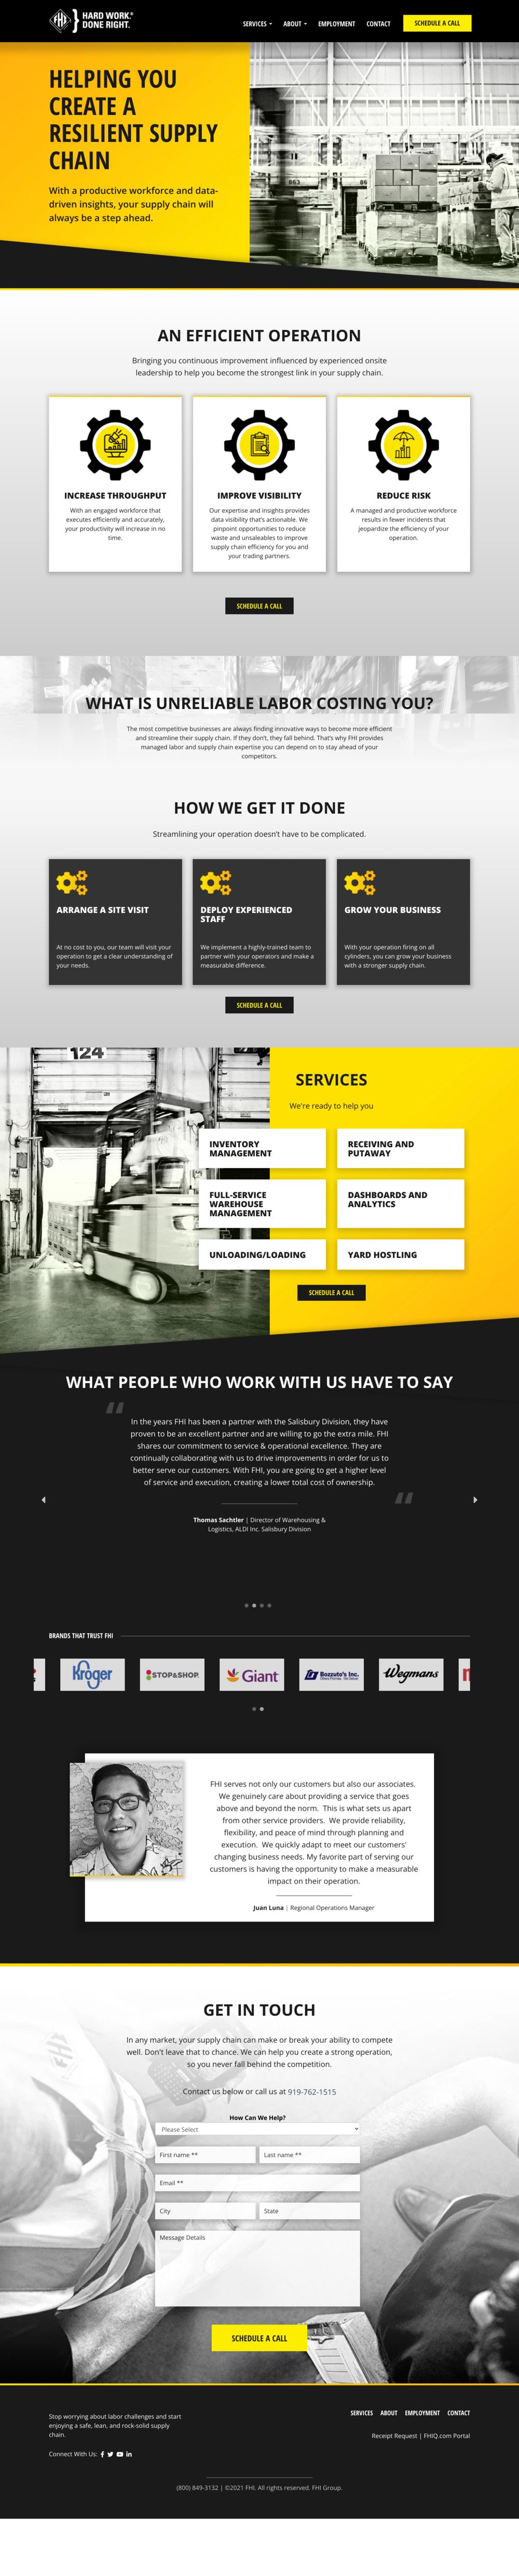 fhi services page - full